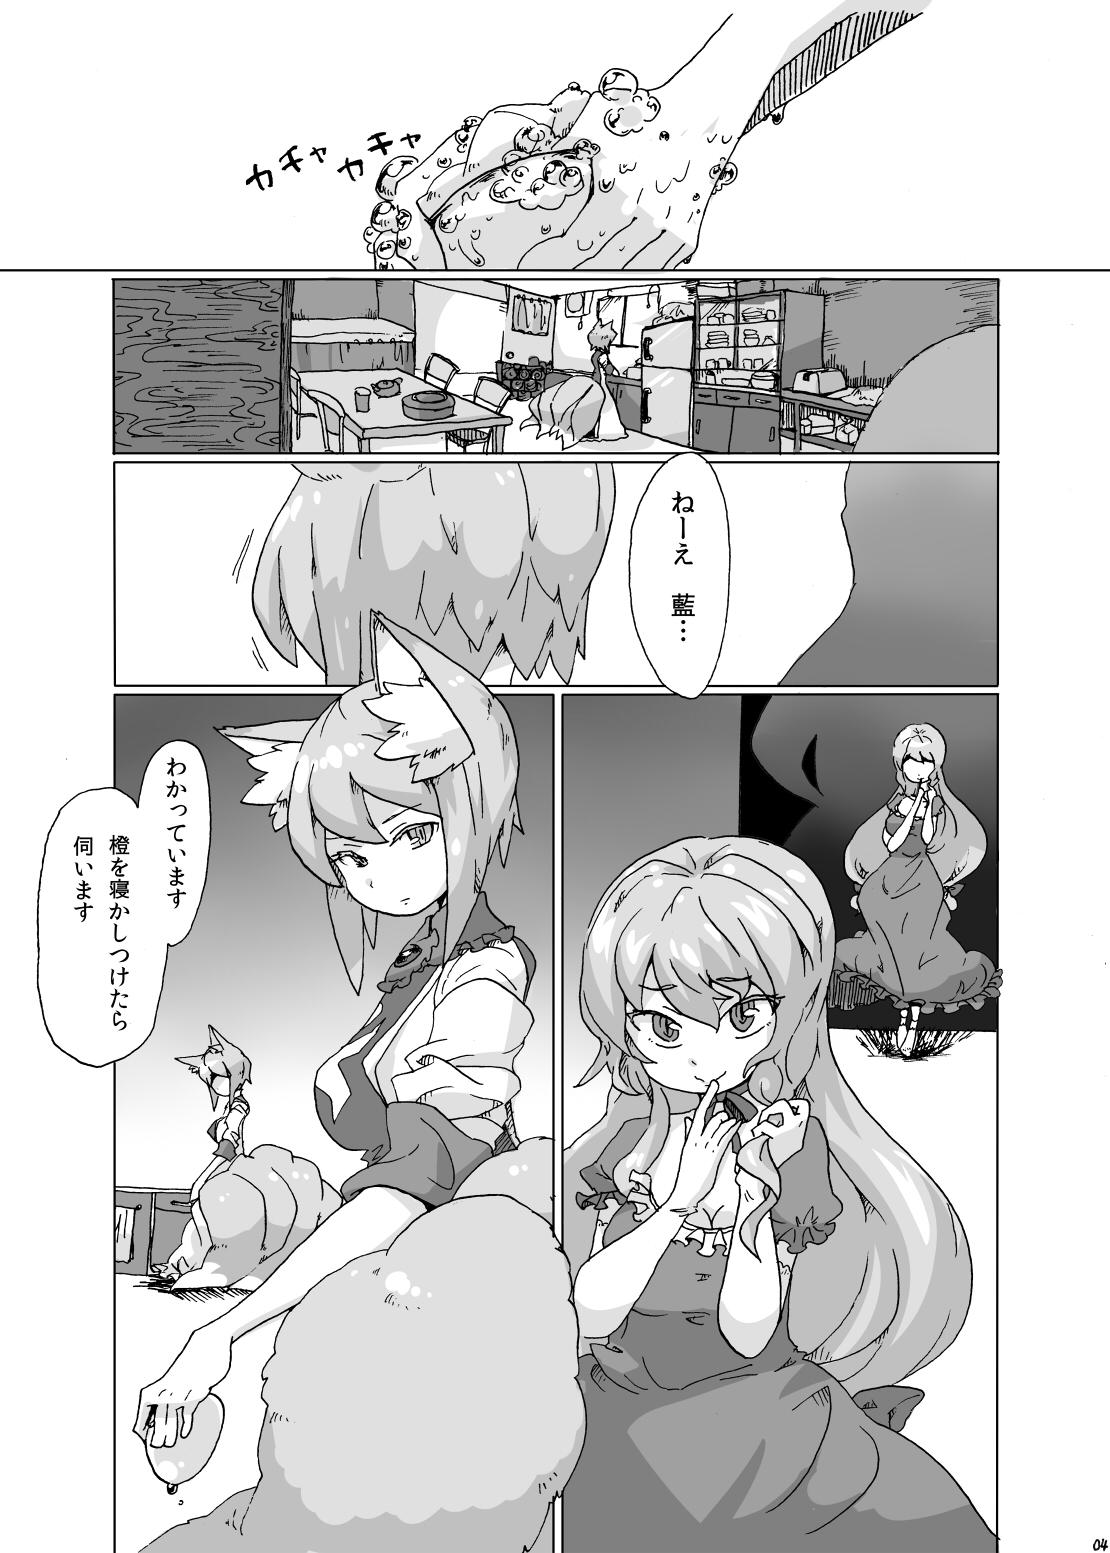 Dominate 紫さまとわたし - Touhou project Shot - Page 3